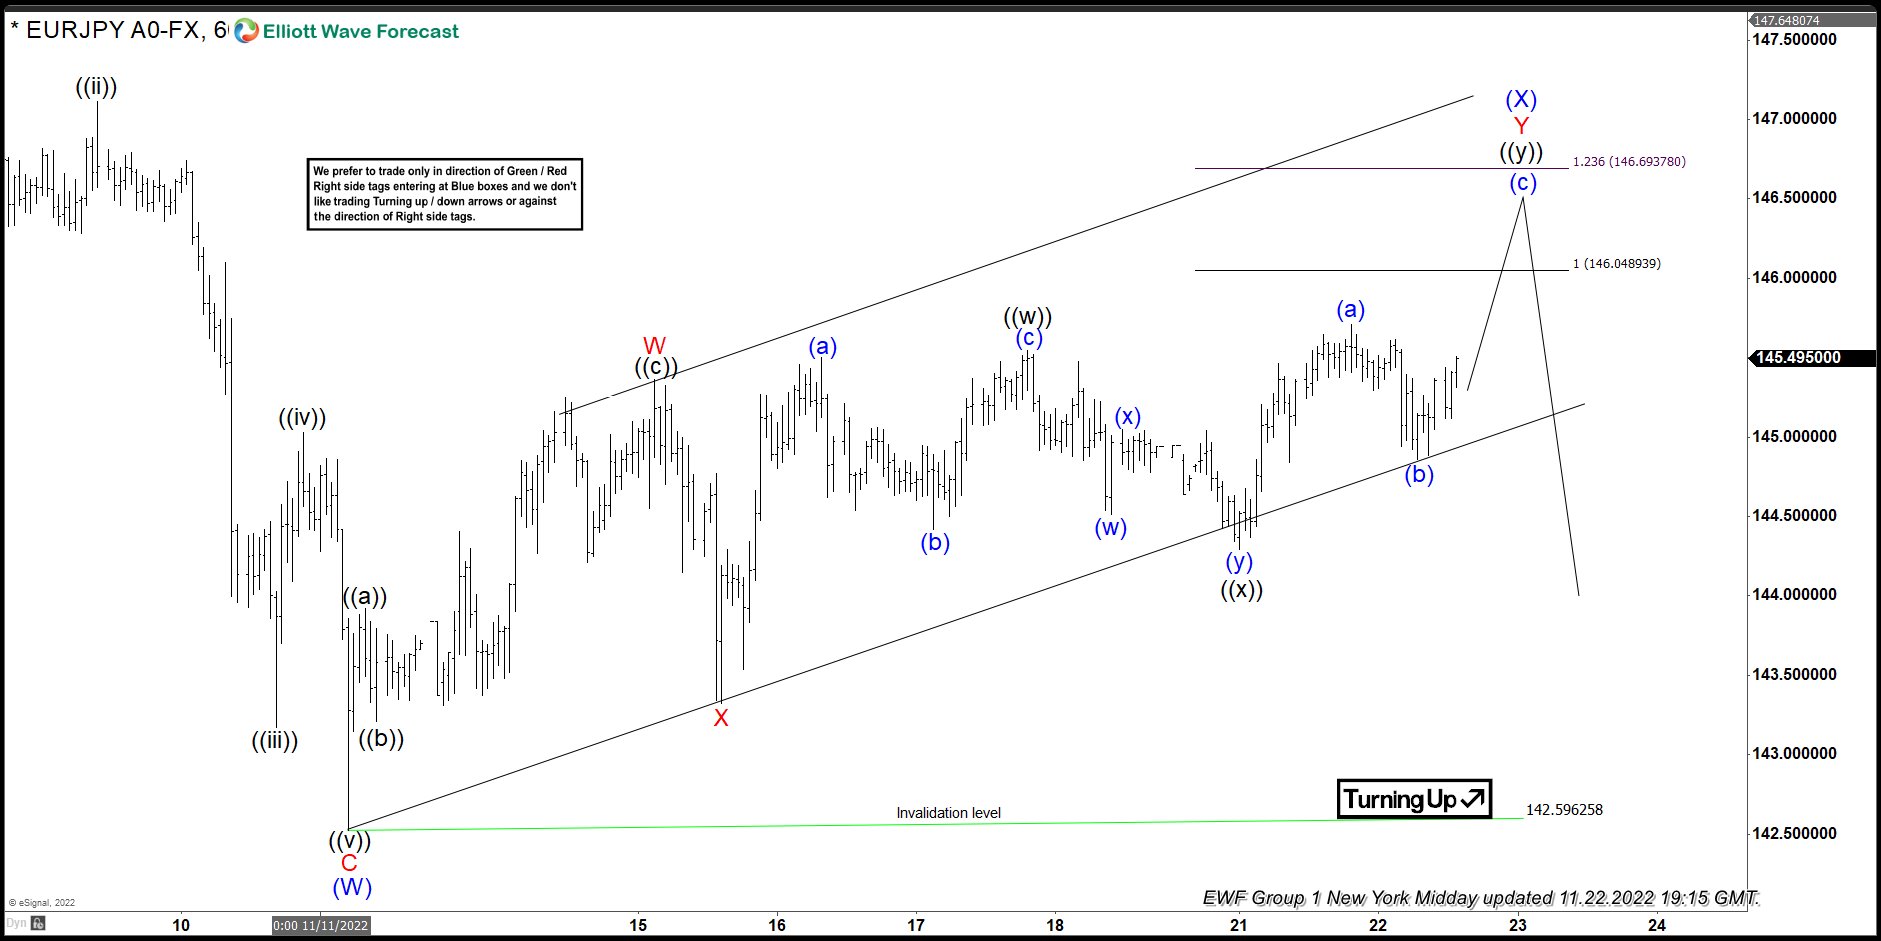 EURJPY Found Sellers After Elliott Wave Double Three Pattern